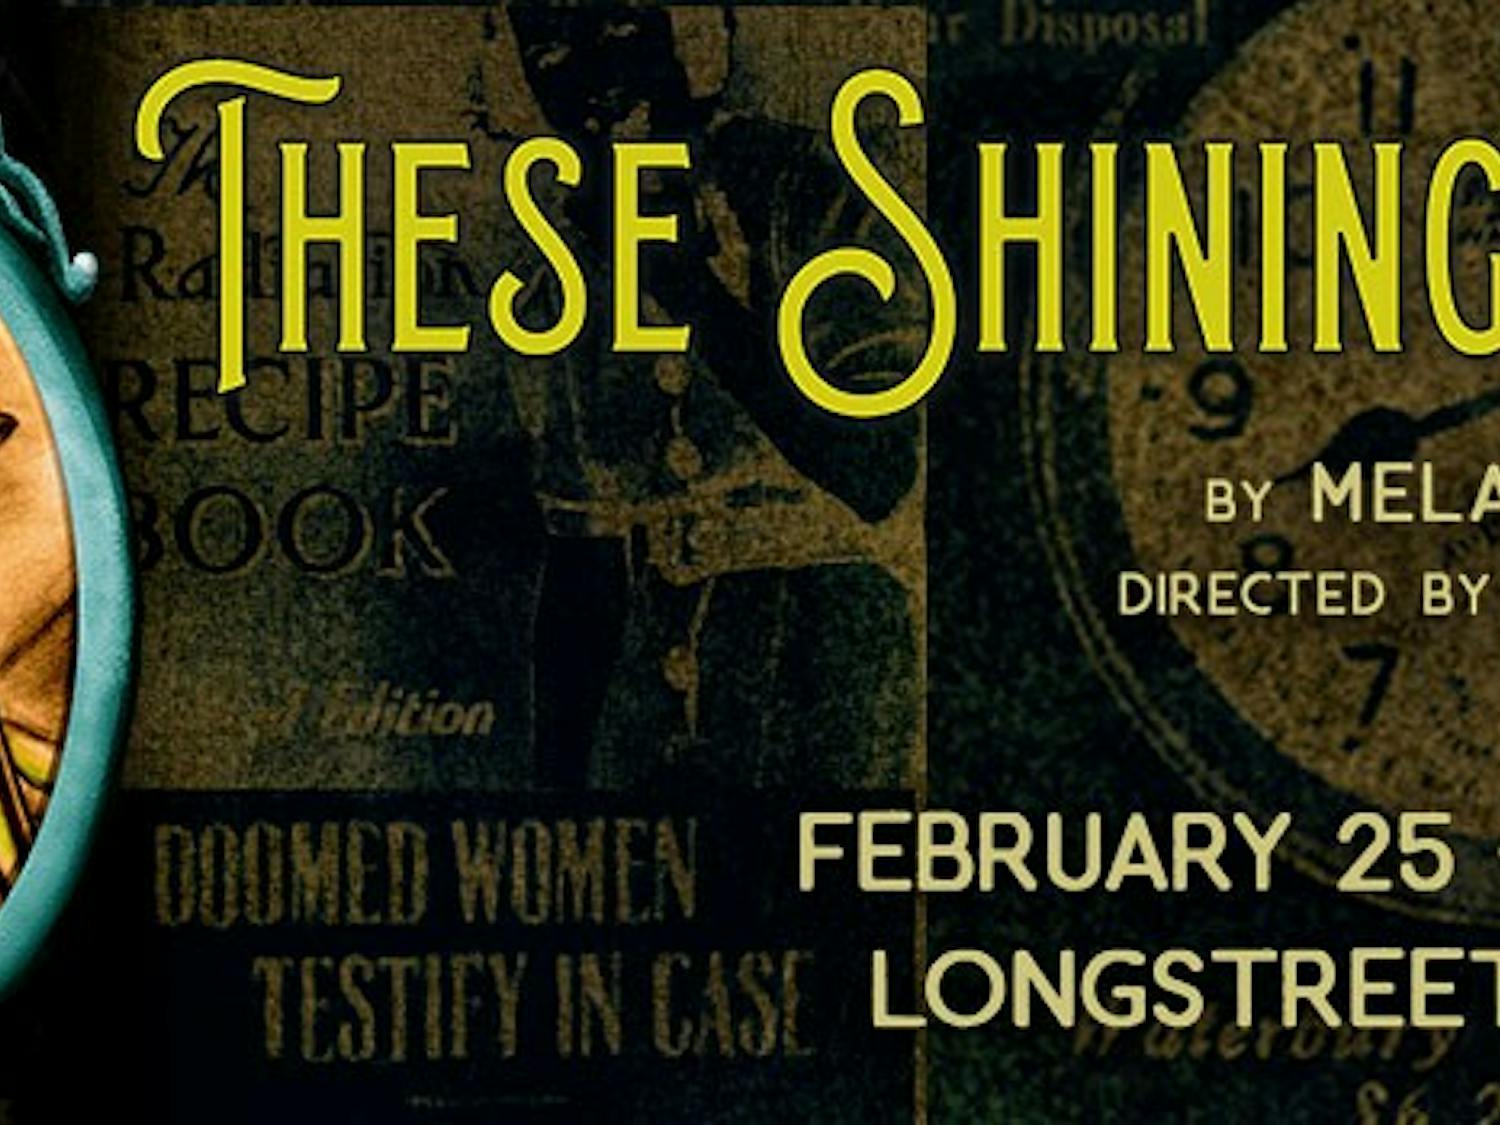 The Department of Theatre and Dance aims to give audiences an intimate view into the lives of the “radium girls” of the 1920’s through its show called "These Shining Lives."